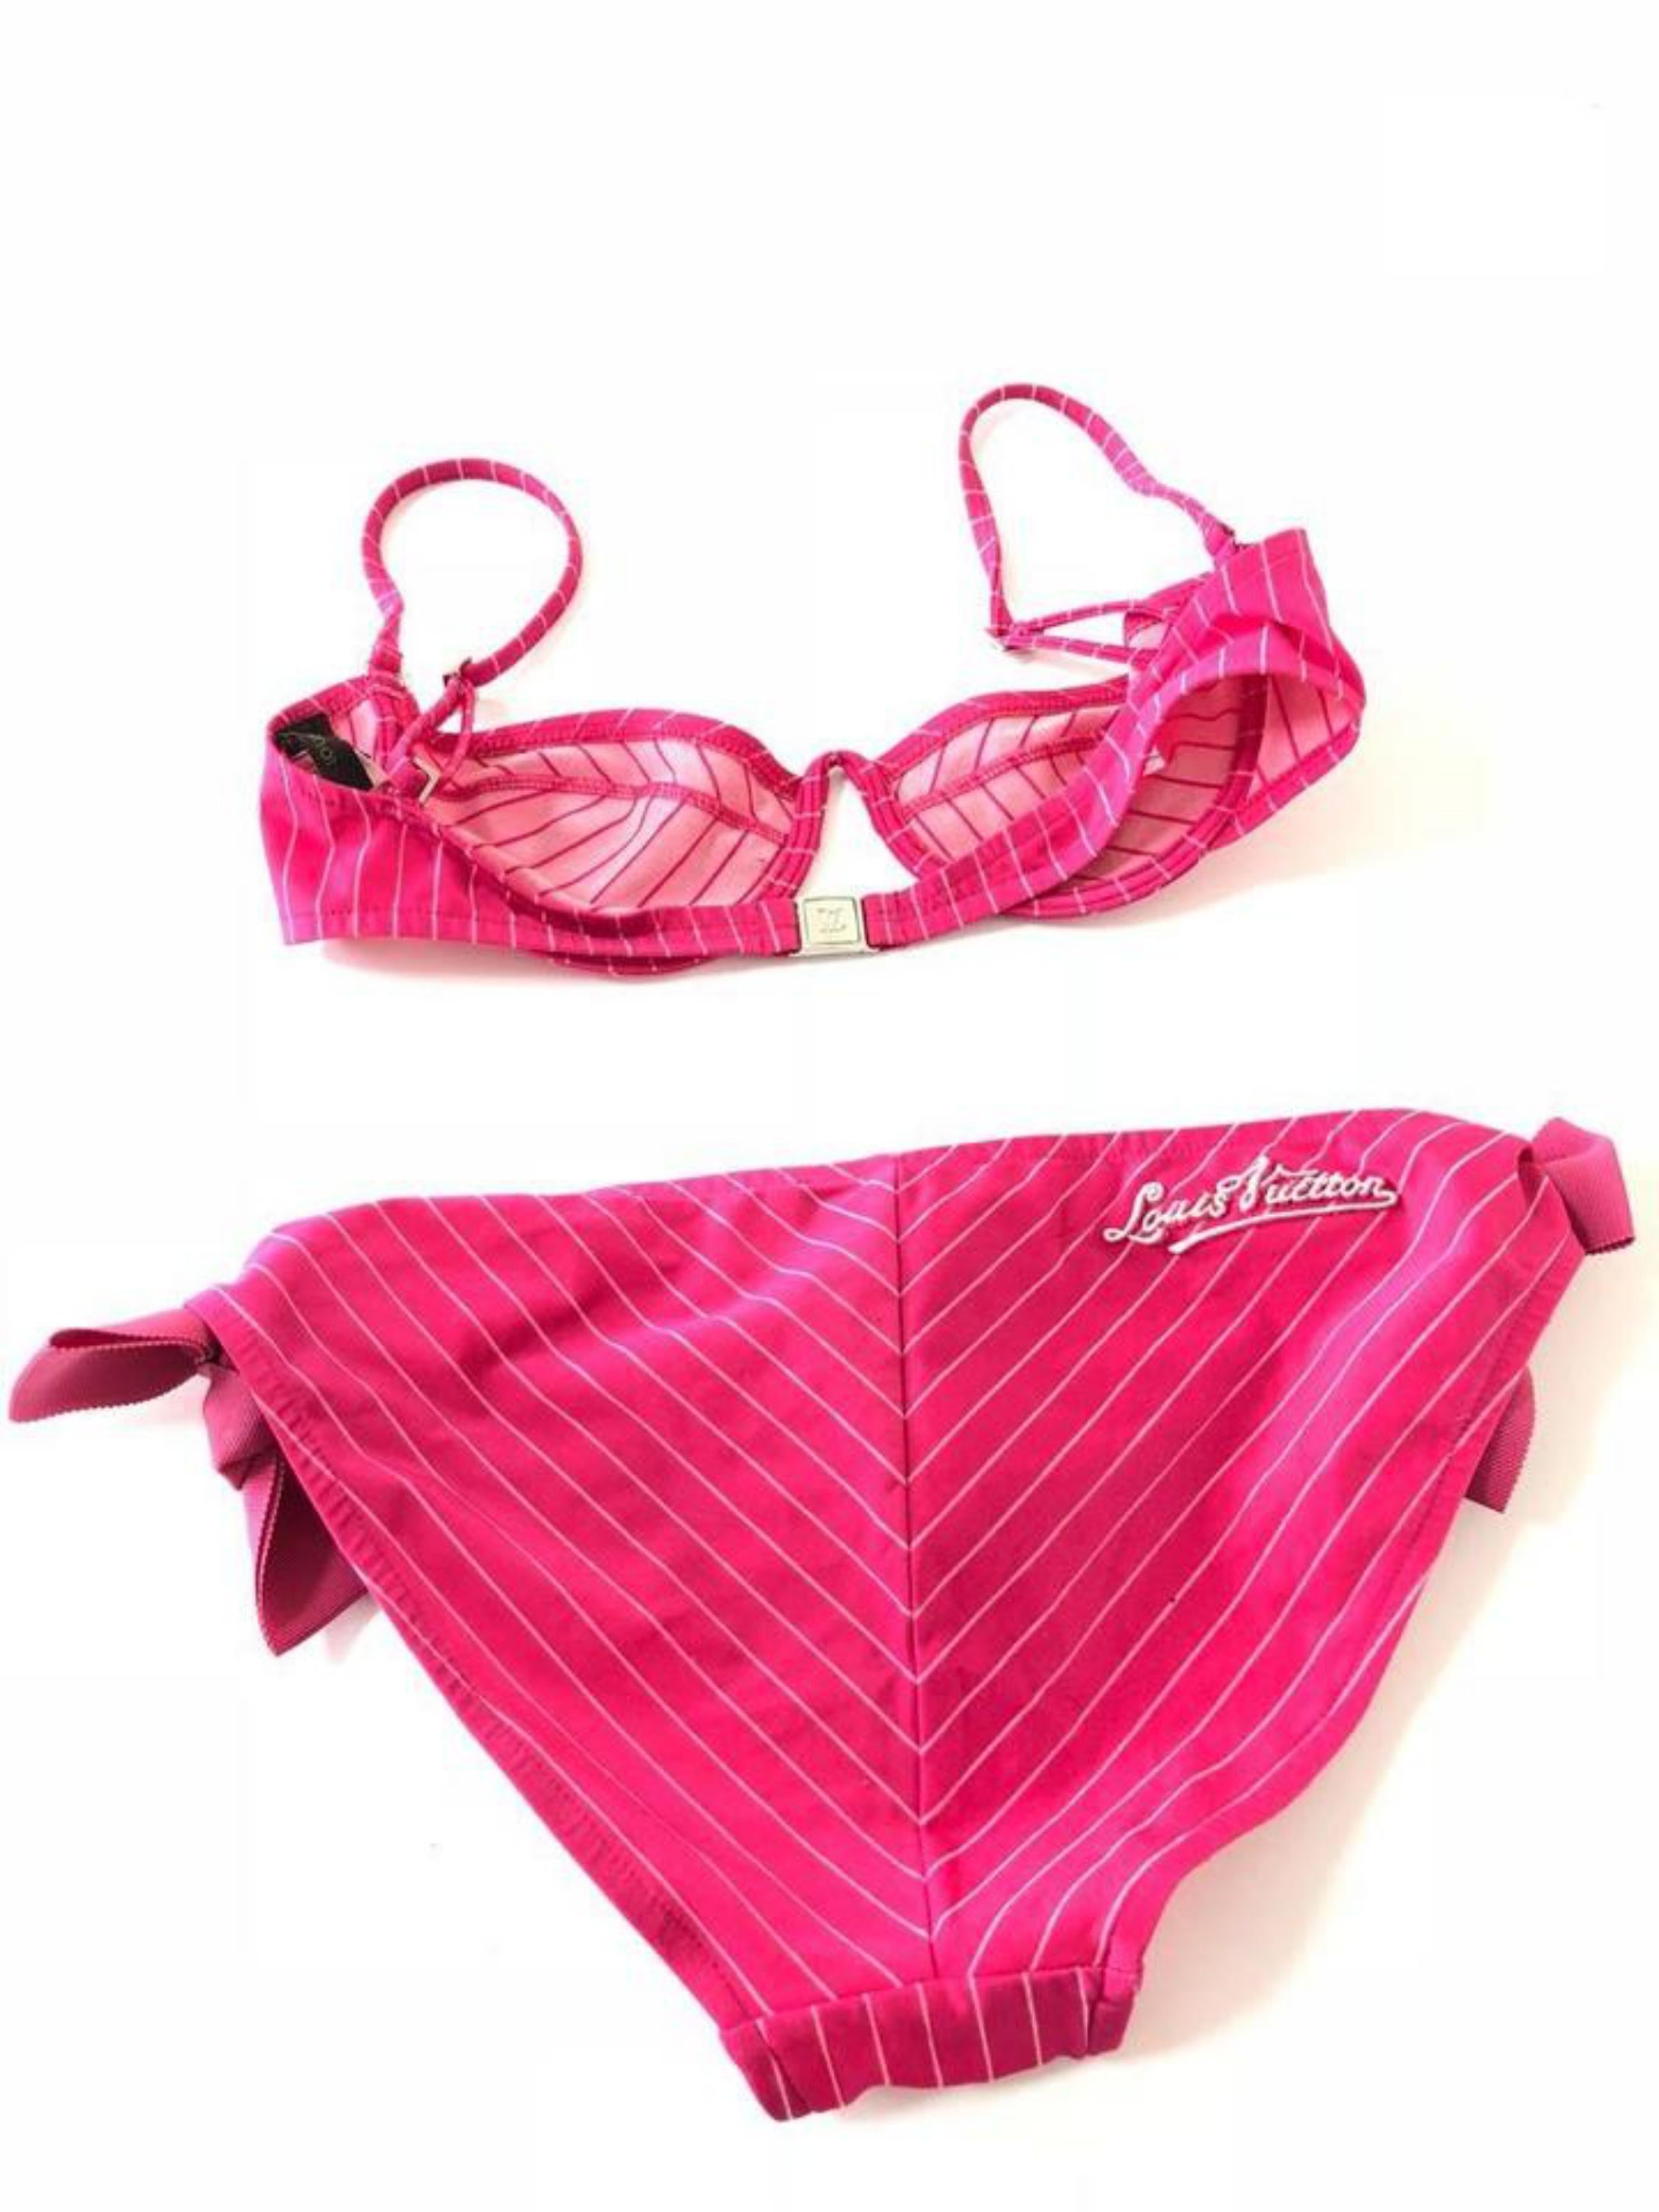 Made In: France
Measurements: Length: 25 Stretches, cup A
Panties: S, M
OVERALL EXCELLENT CONDITION
( 9/10 or A )
Signs of Wear:
Light signs of wear. 
This item does not come with any extra accessories.
Please review photos for more details.
Color